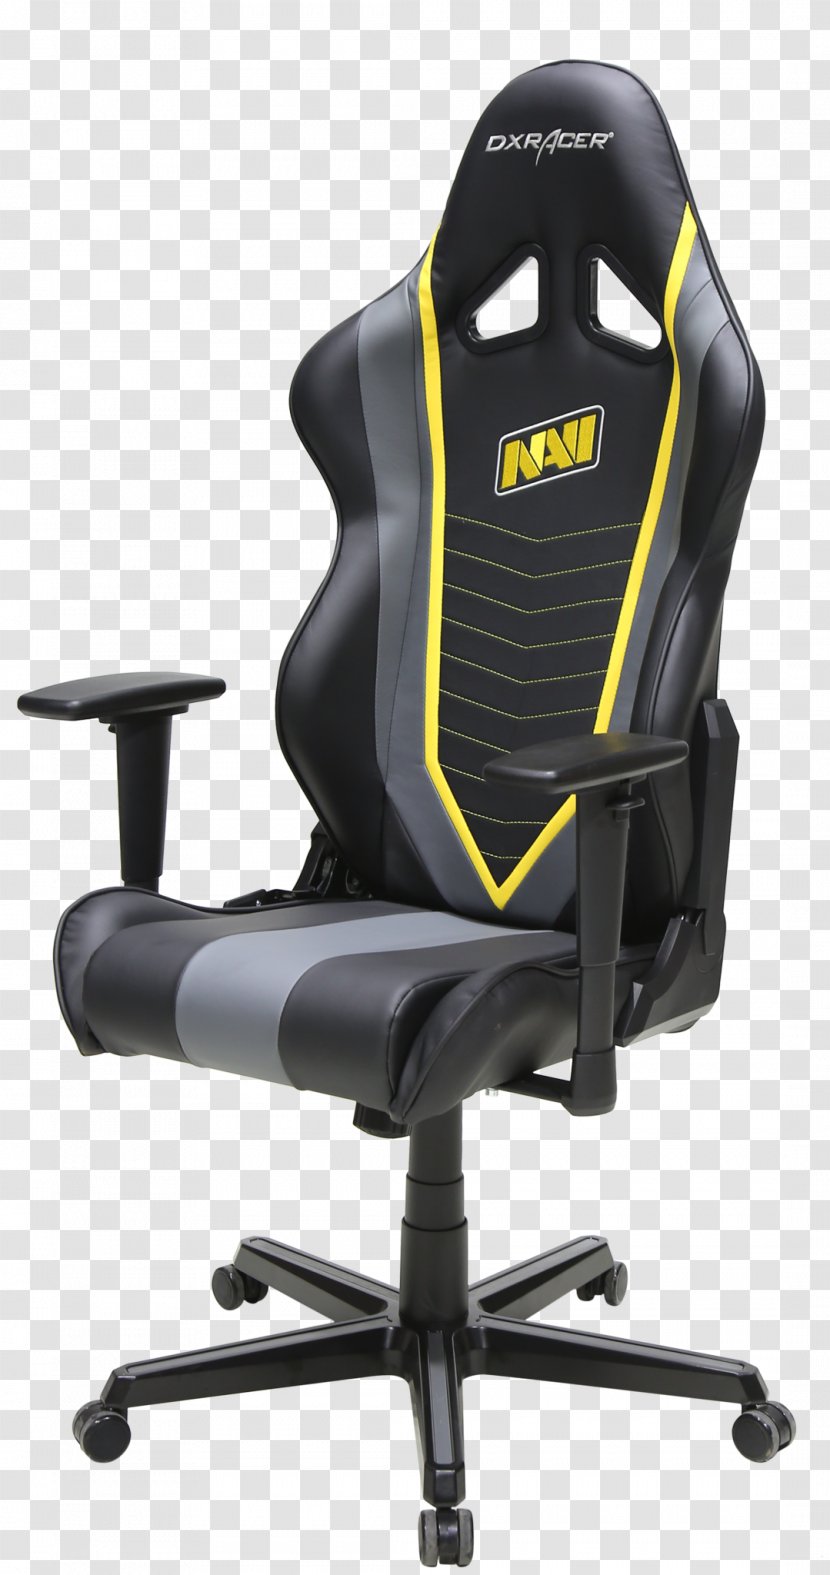 DXRacer Gaming Chair Office & Desk Chairs Video Game - Seat Transparent PNG